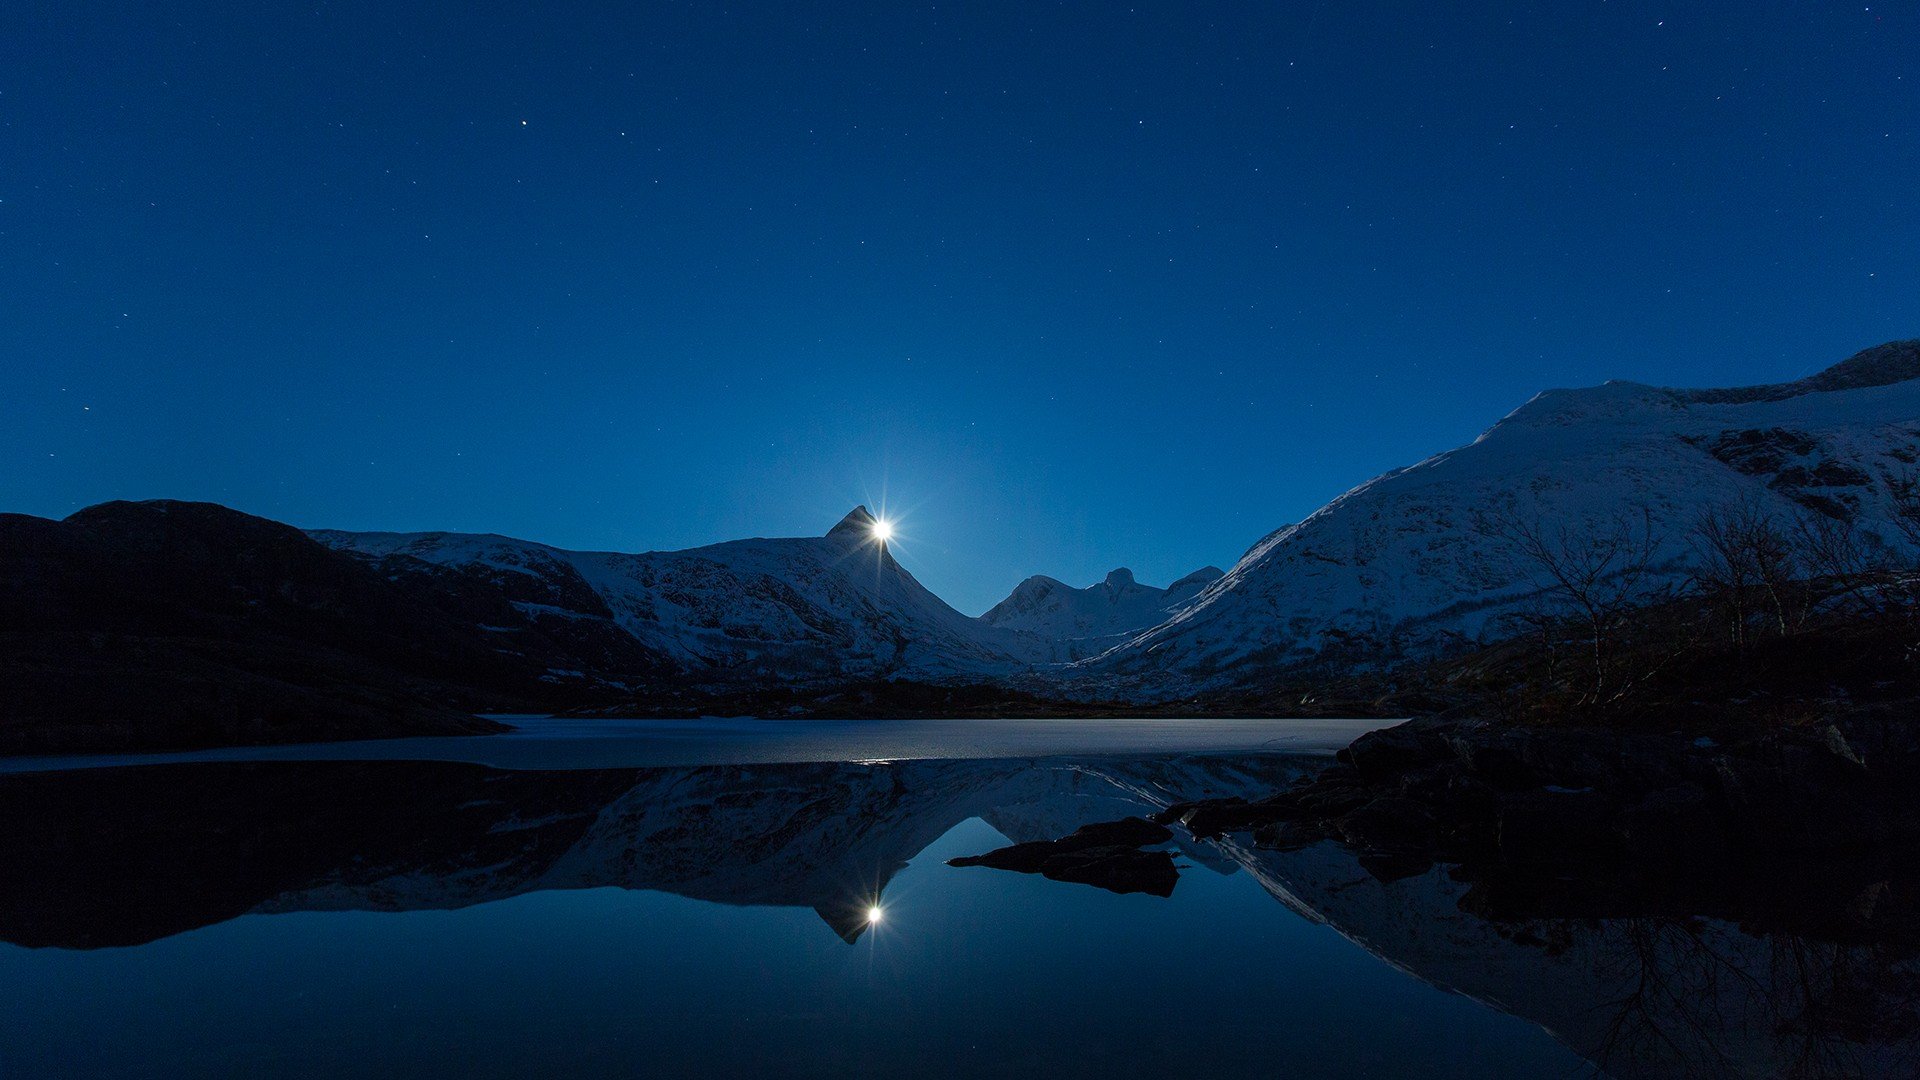 mountains, calm, night, nature, landscape, calm waters Gallery HD Wallpaper